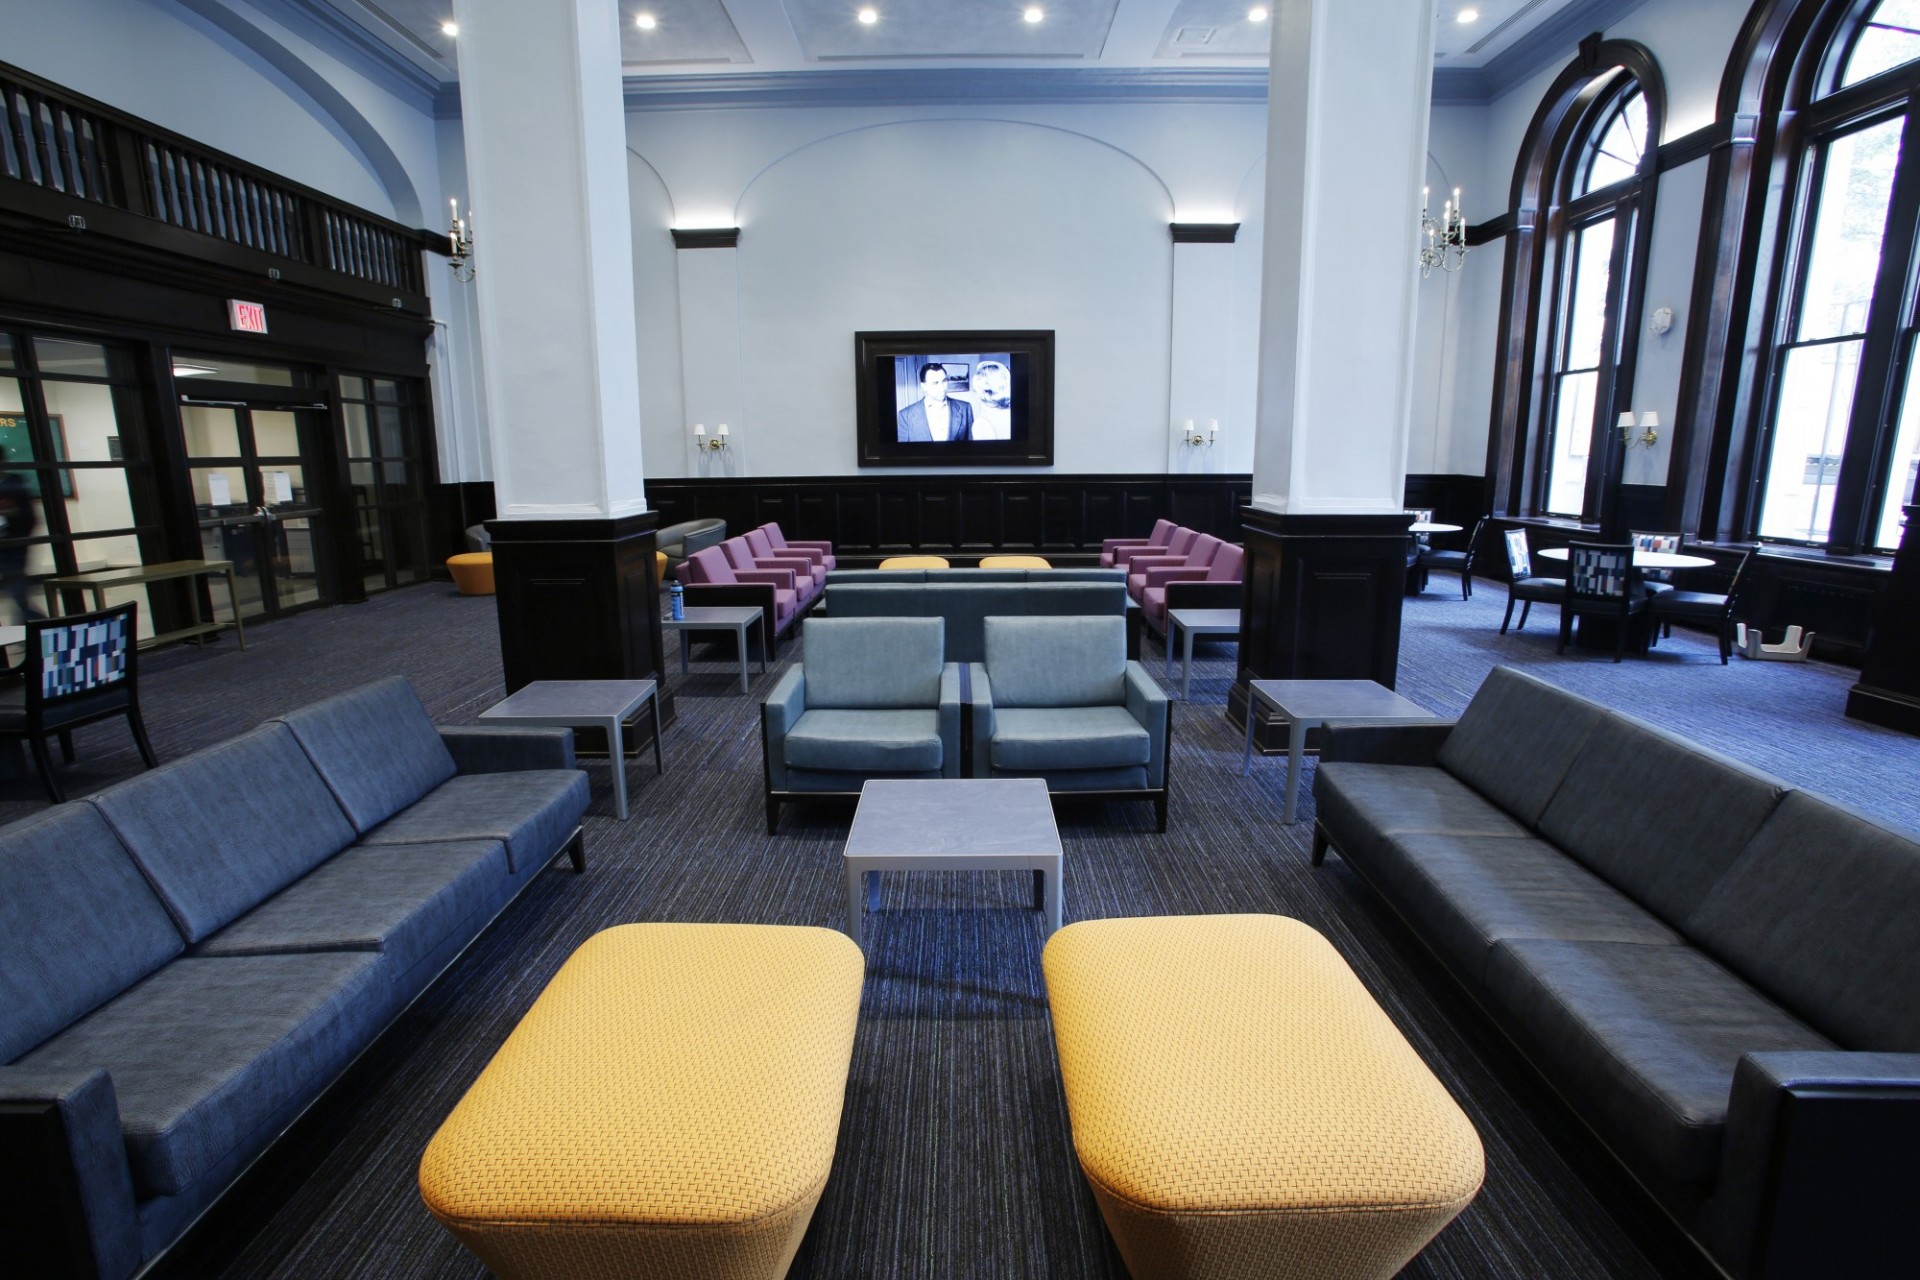 A view of seating and large screen television in John Jay Lounge.